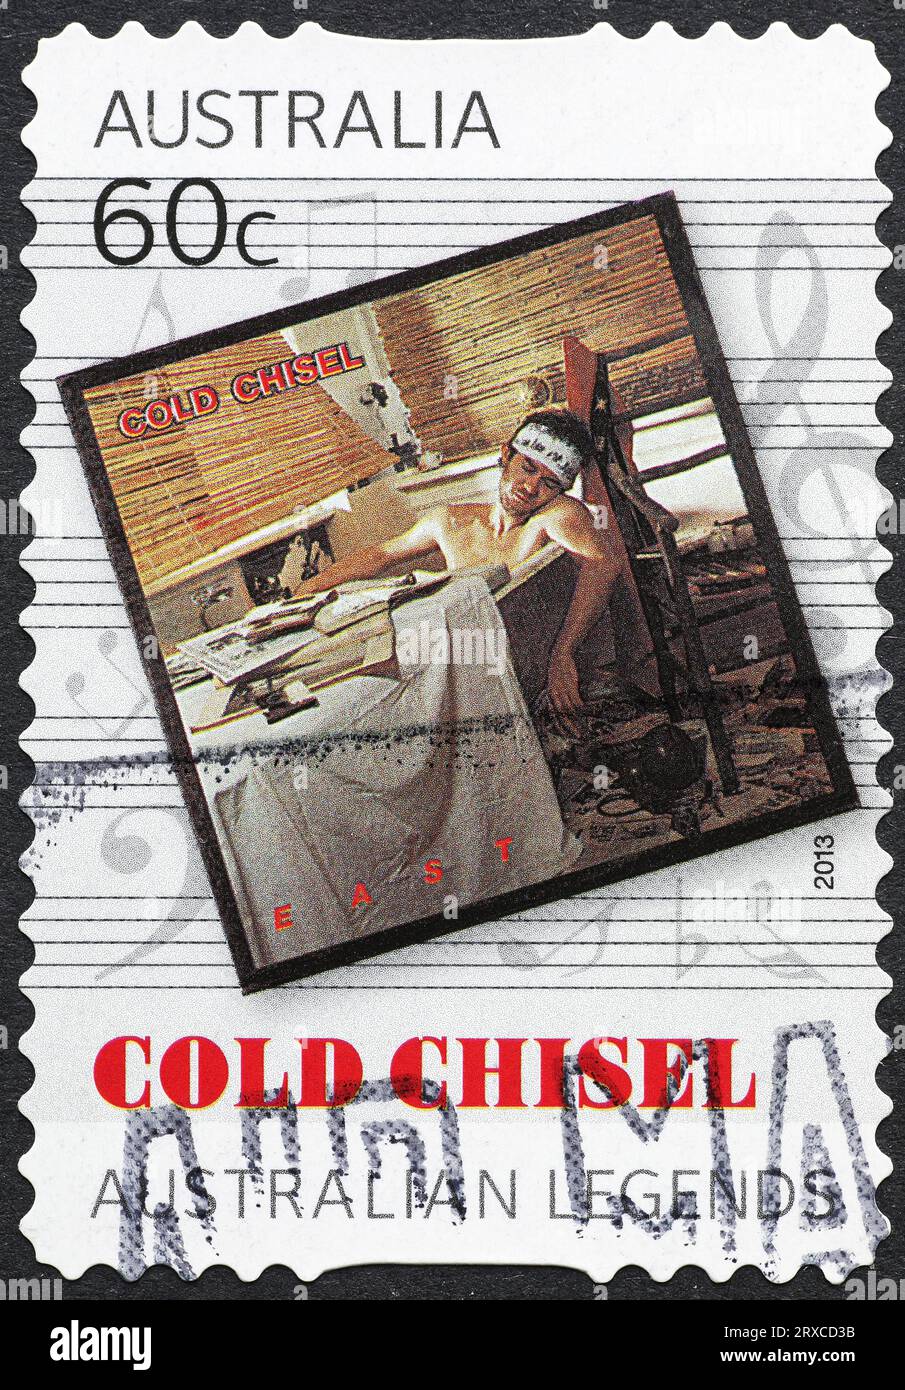 Album 'East' by Cold chisel on australian postage stamp Stock Photo